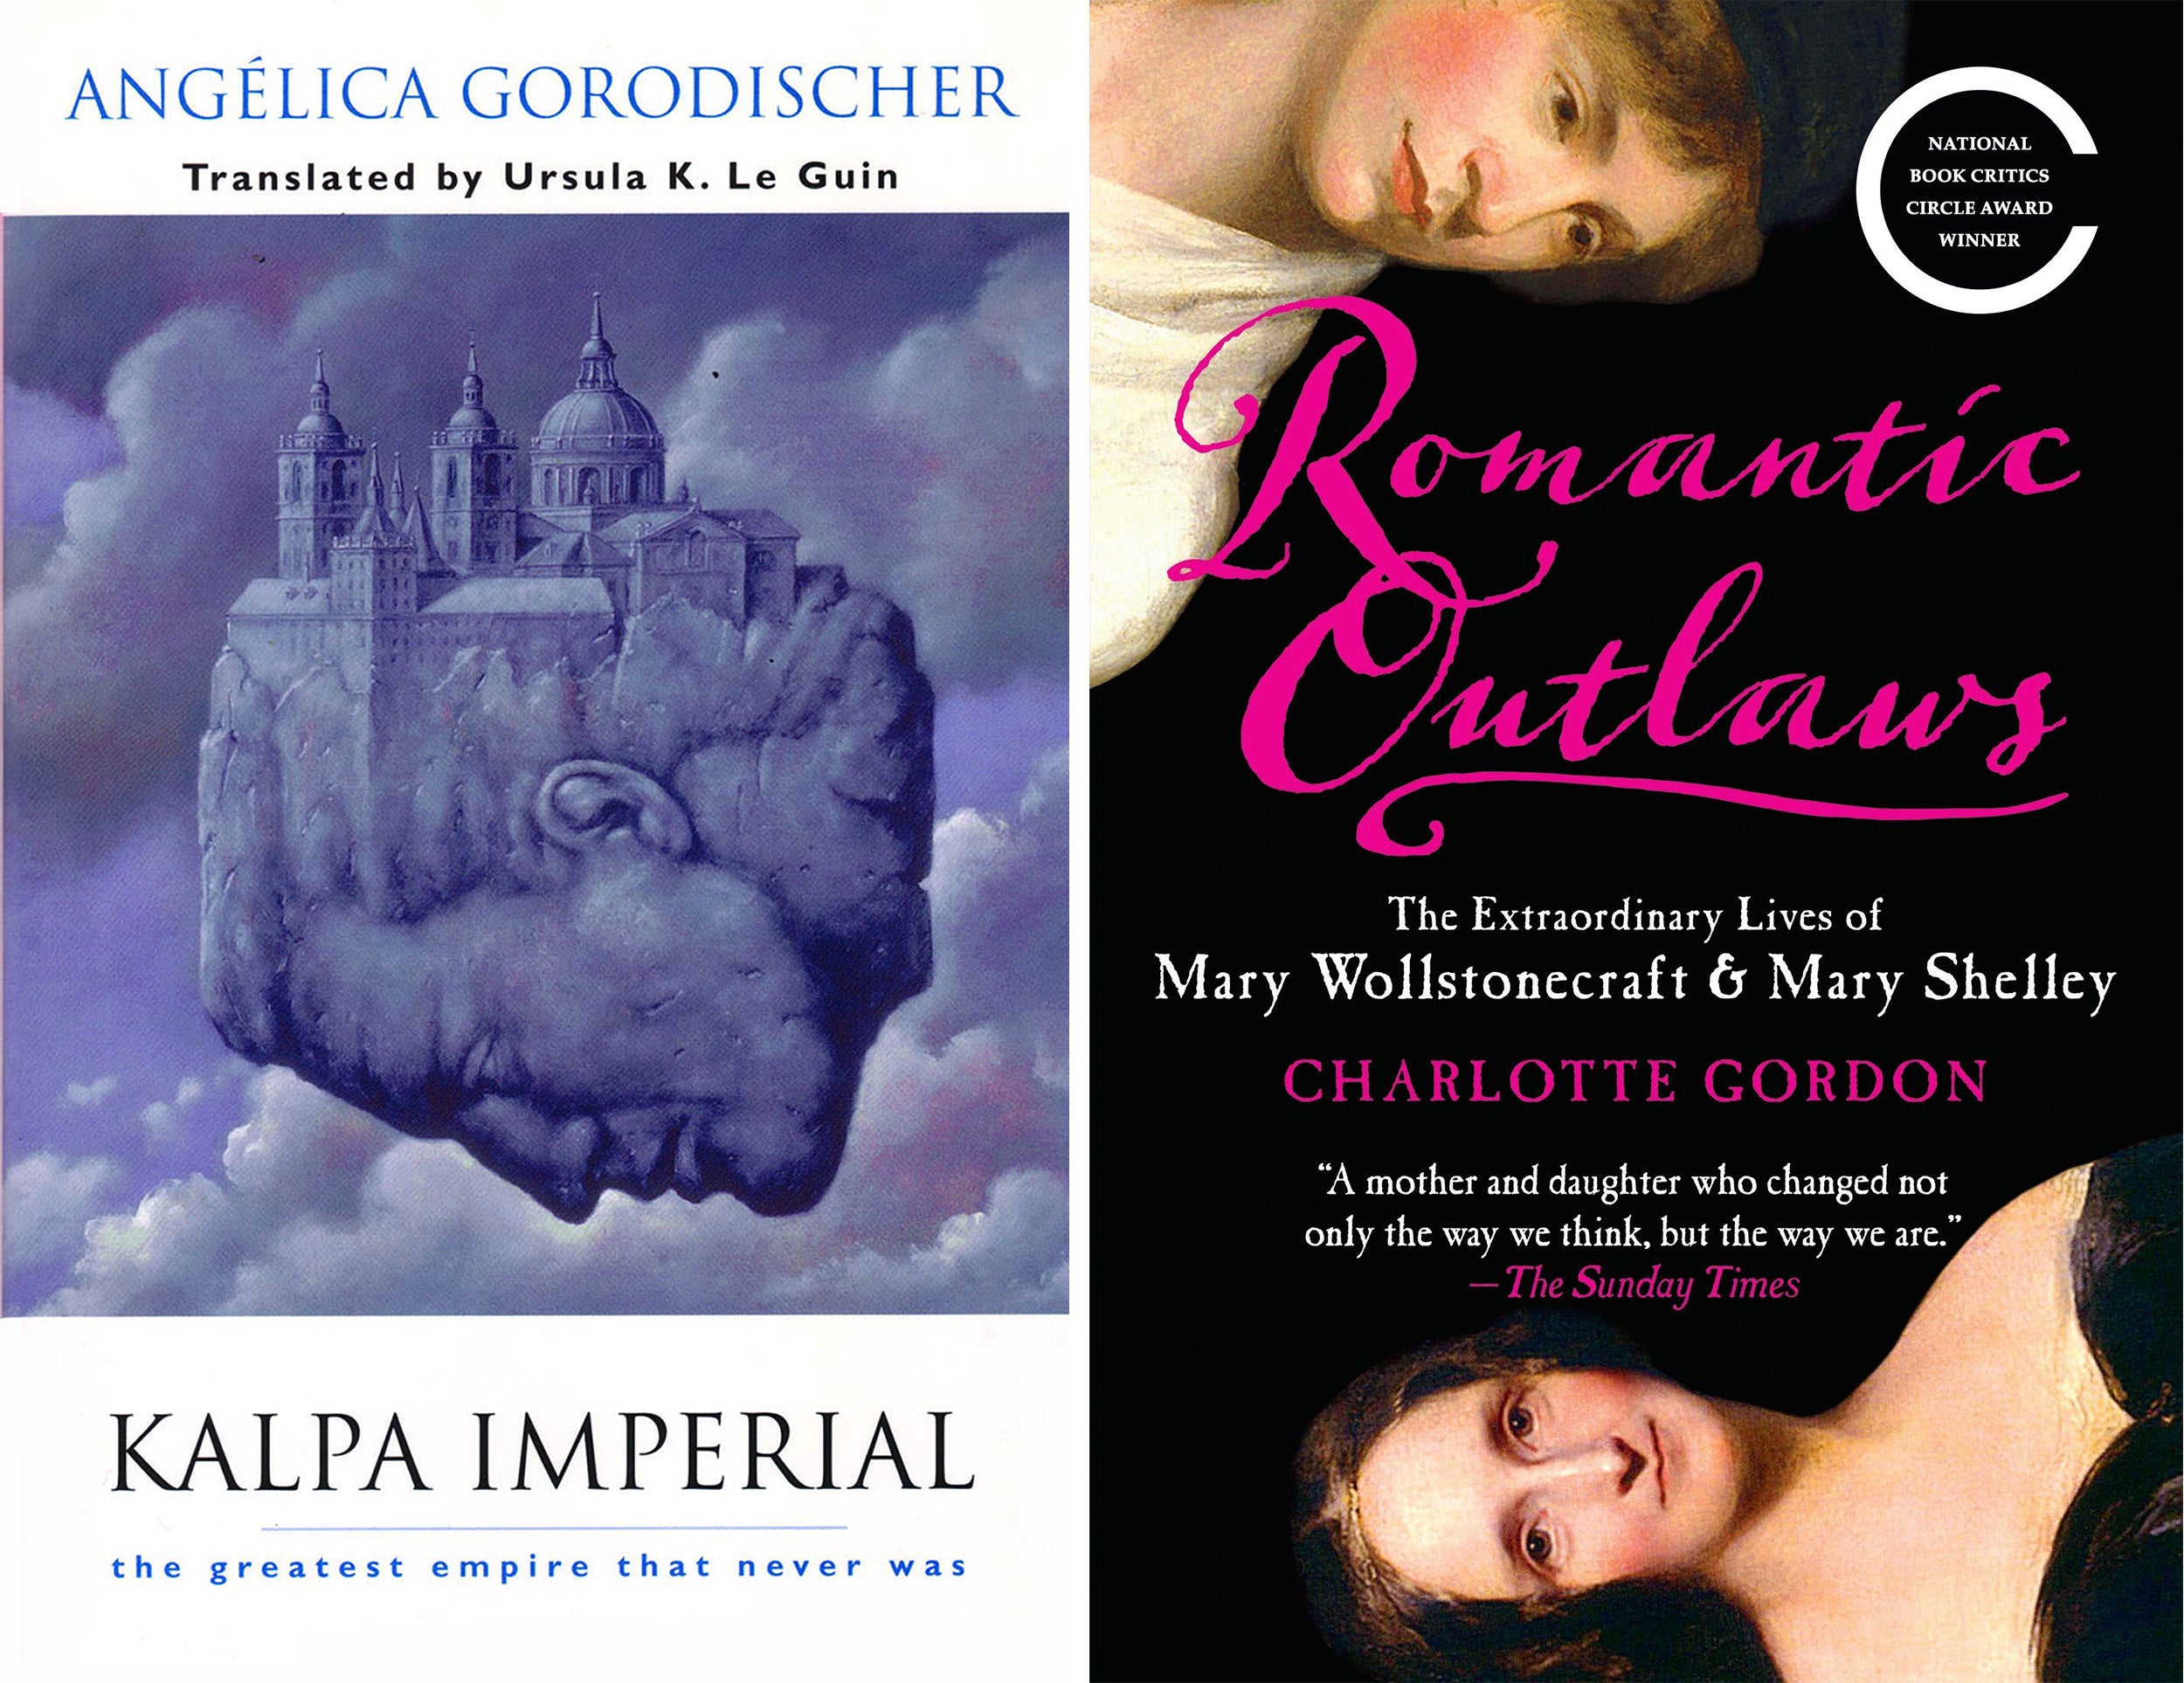 Kala Imperial and Romantic Outlaws book covers